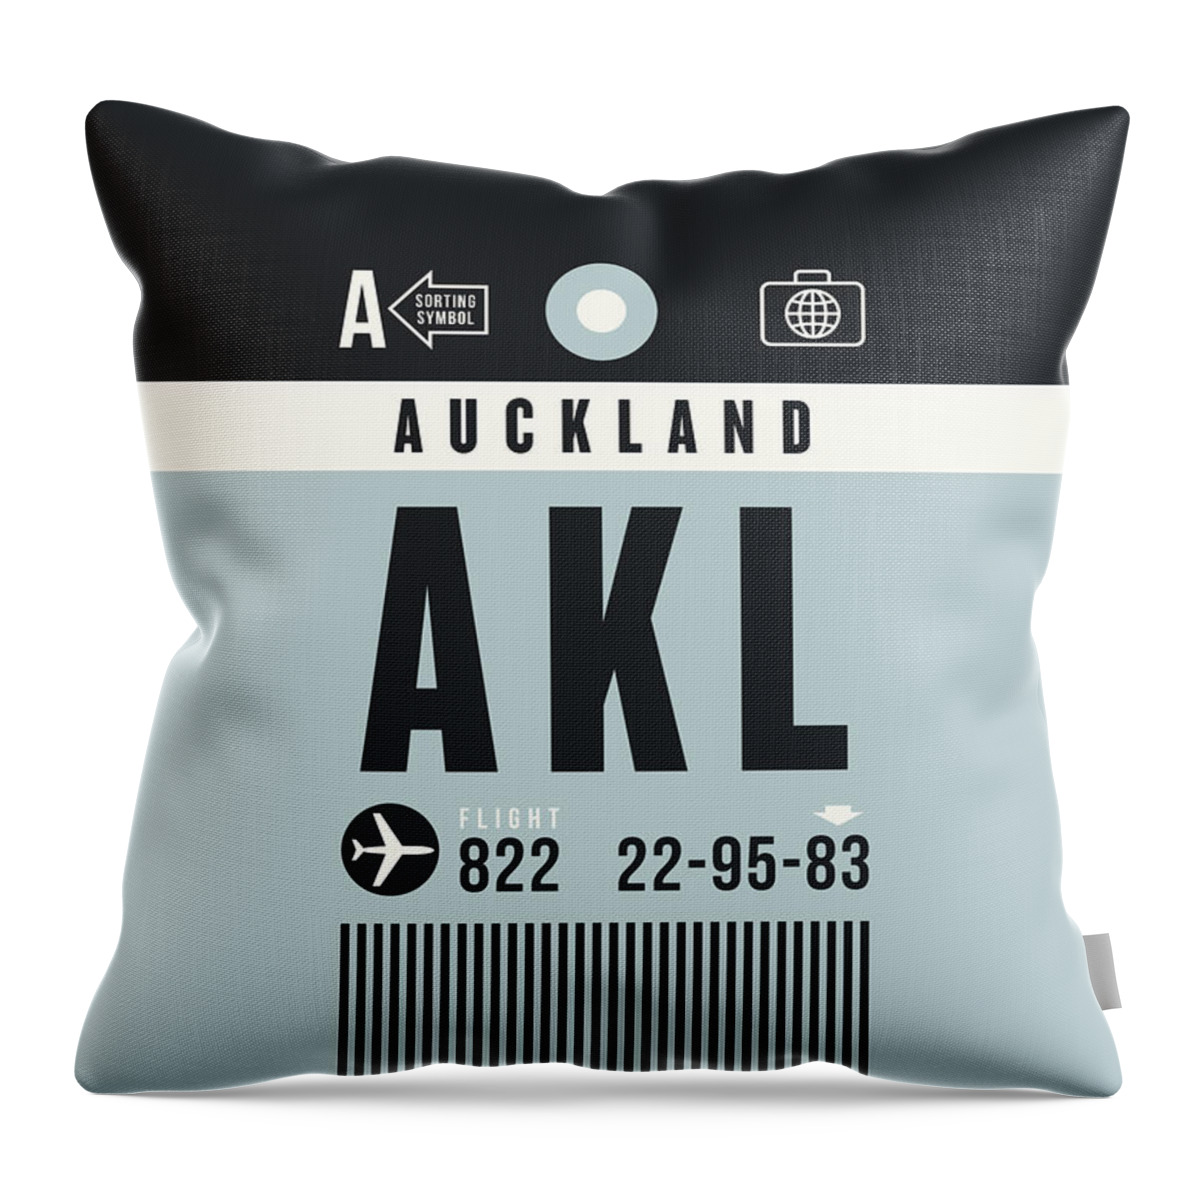 Retro Styled Luggage Tag Design For Auckland International Airport (akl) New Zealand. Throw Pillow featuring the digital art Luggage Tag A - AKL Auckland New Zealand by Organic Synthesis